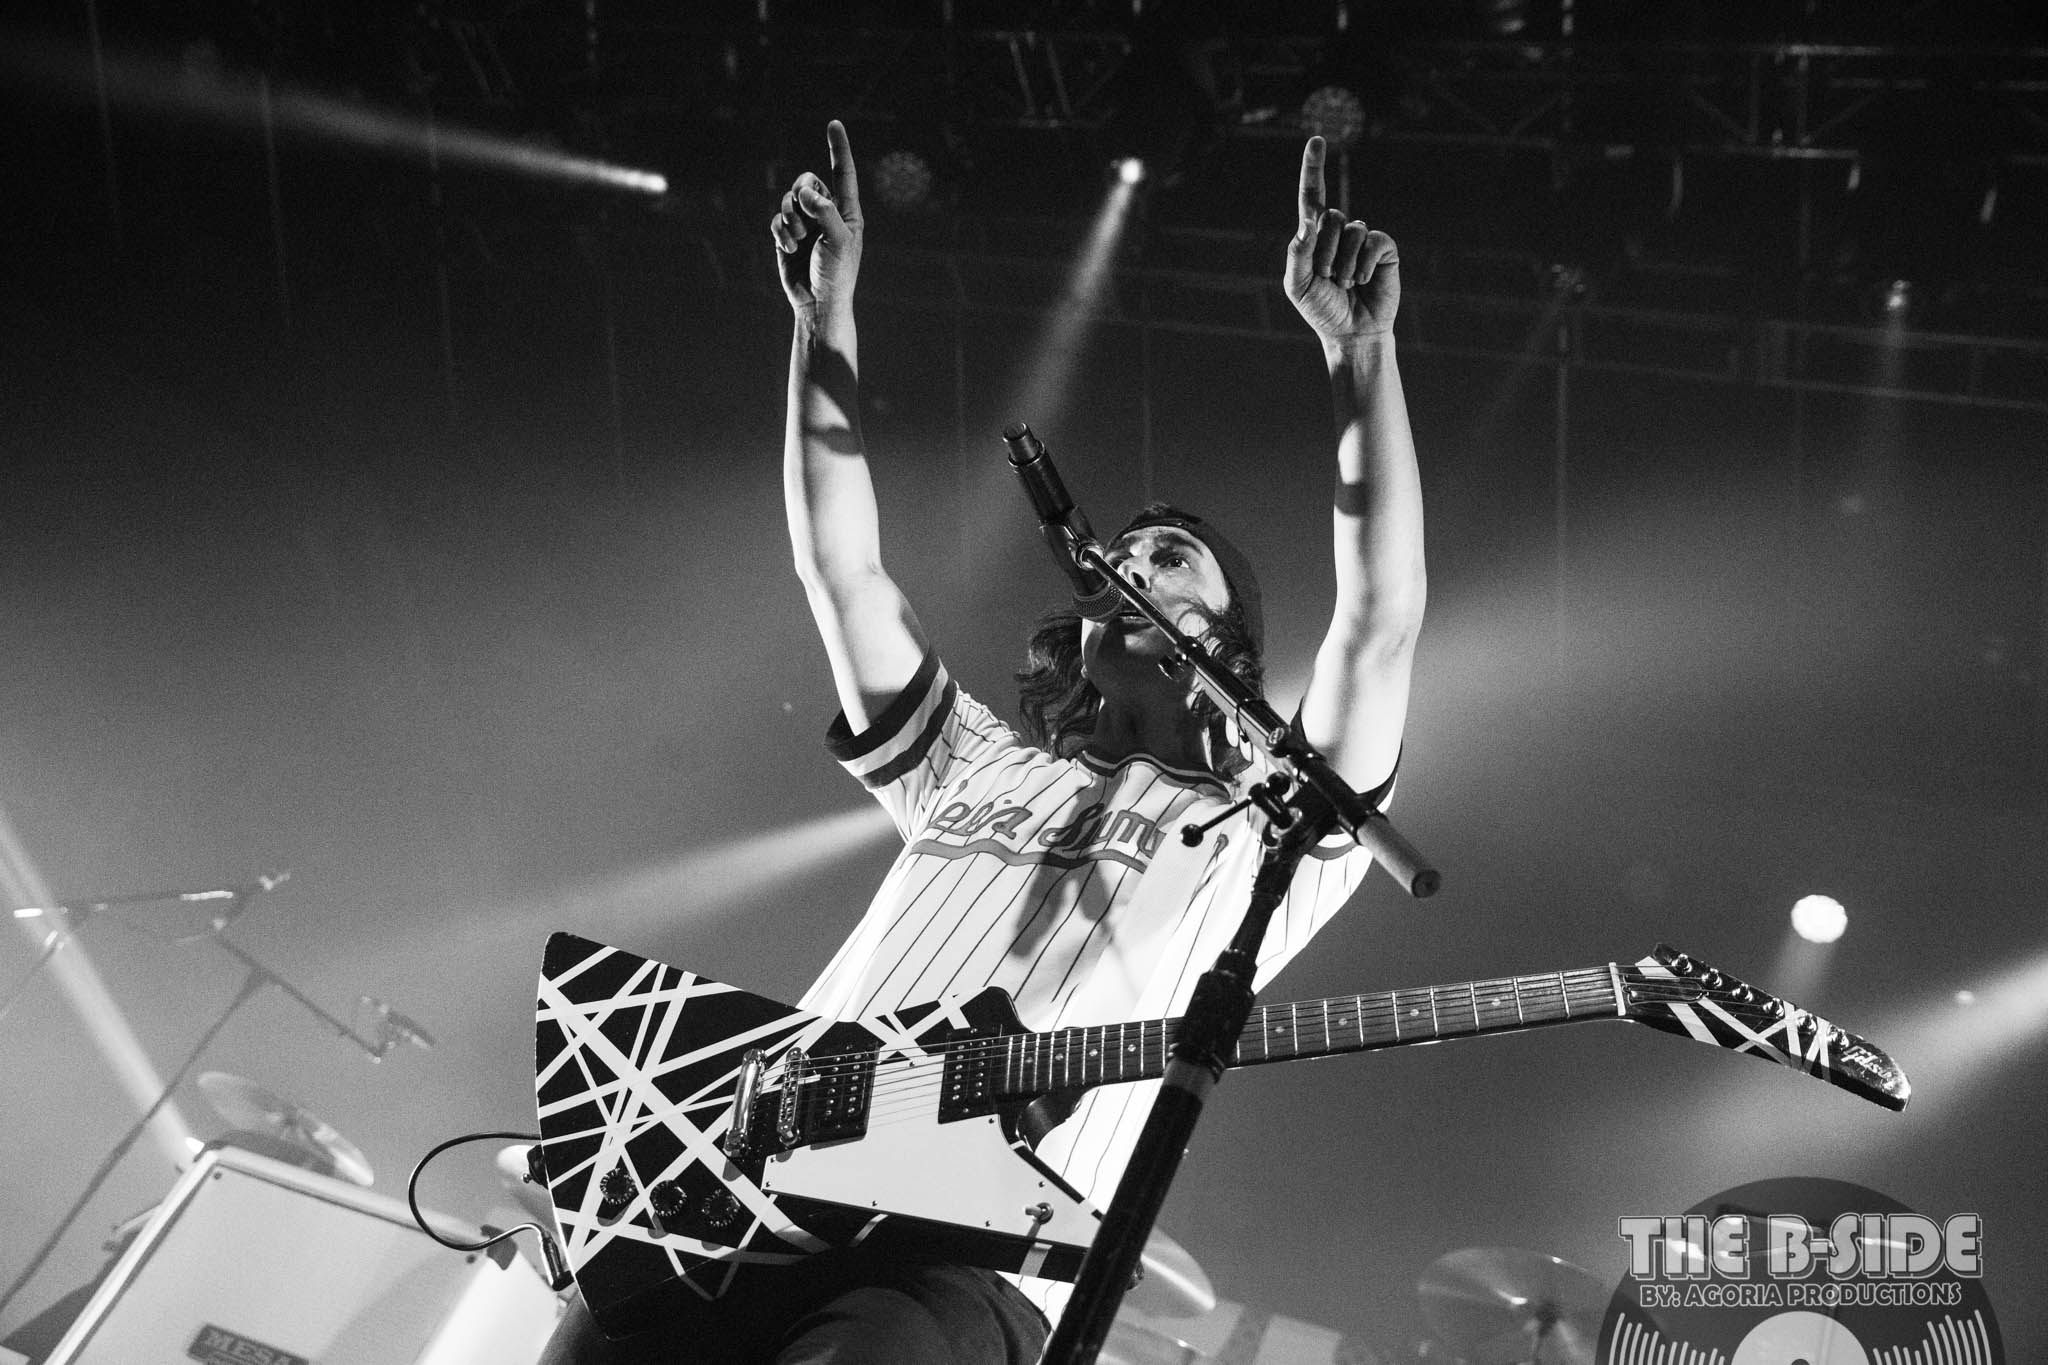 Pierce the Veil lead vocalist, Vic Fuentes, performing live at Rebel Toronto on Oct. 5, 2022. Taken by Leo Montero, Truffle Images, The B-Side Blog